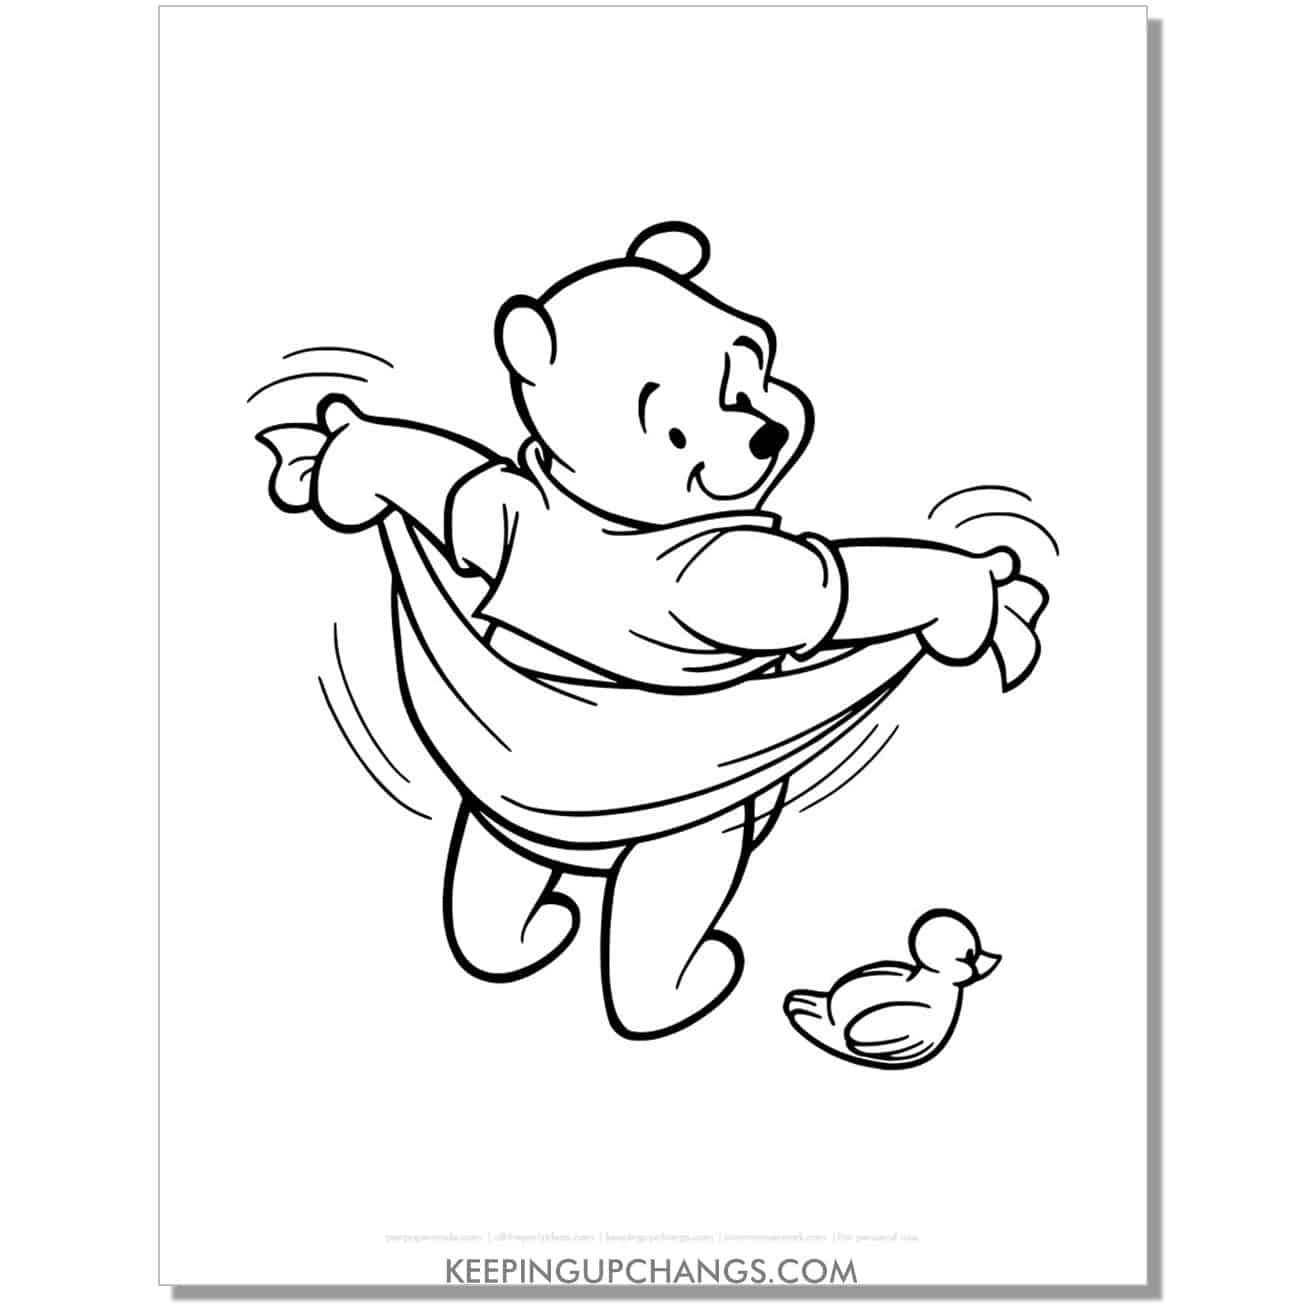 winnie the pooh drying off with towel coloring page, sheet.